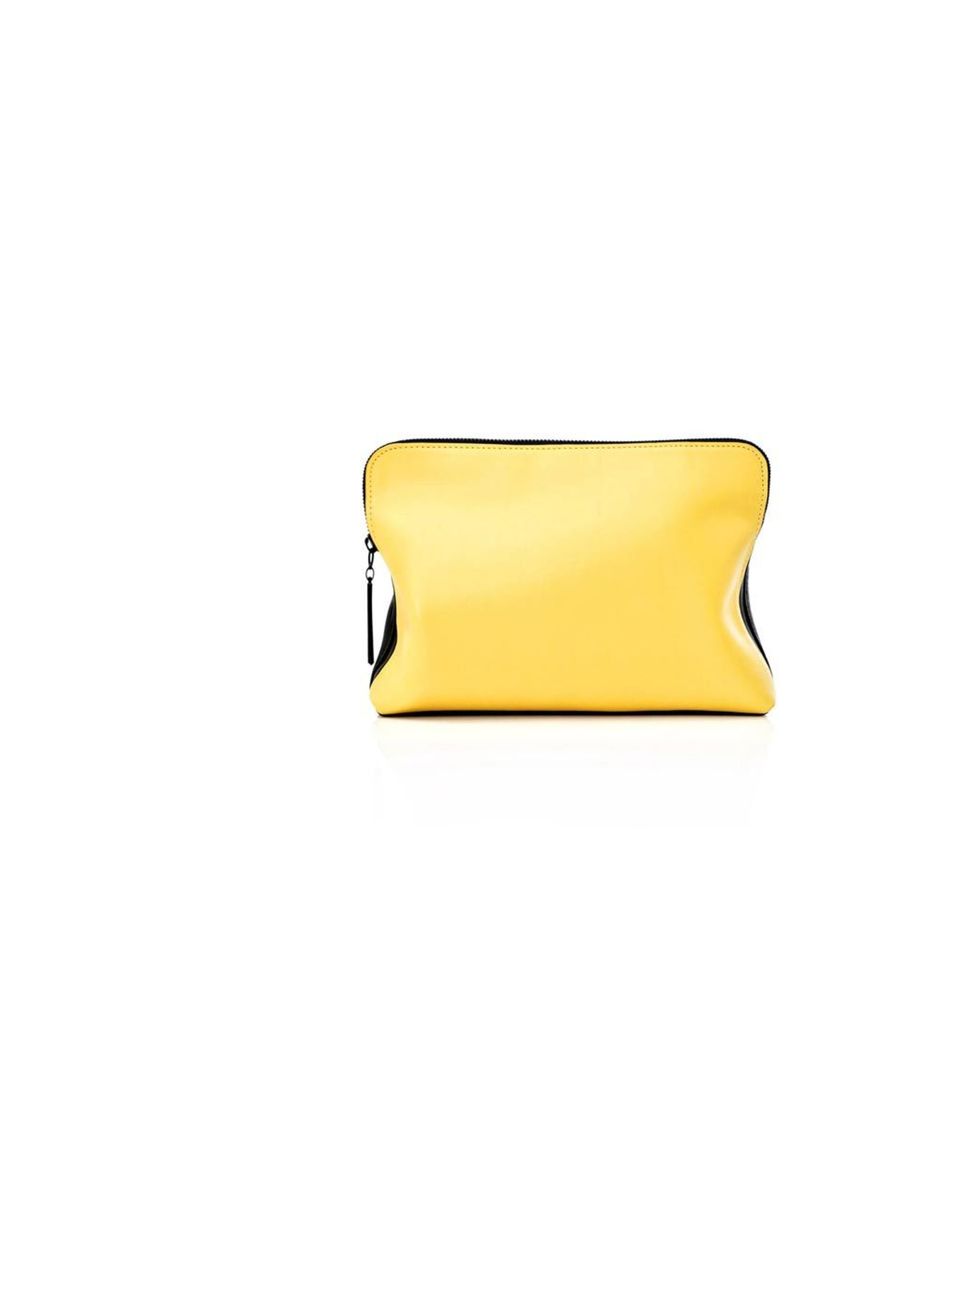 <p>3.1 Phillip Lim '31 Minute' clutch bag, £275, at <a href="http://www.matchesfashion.com/product/125568">Matches Fashion</a></p>